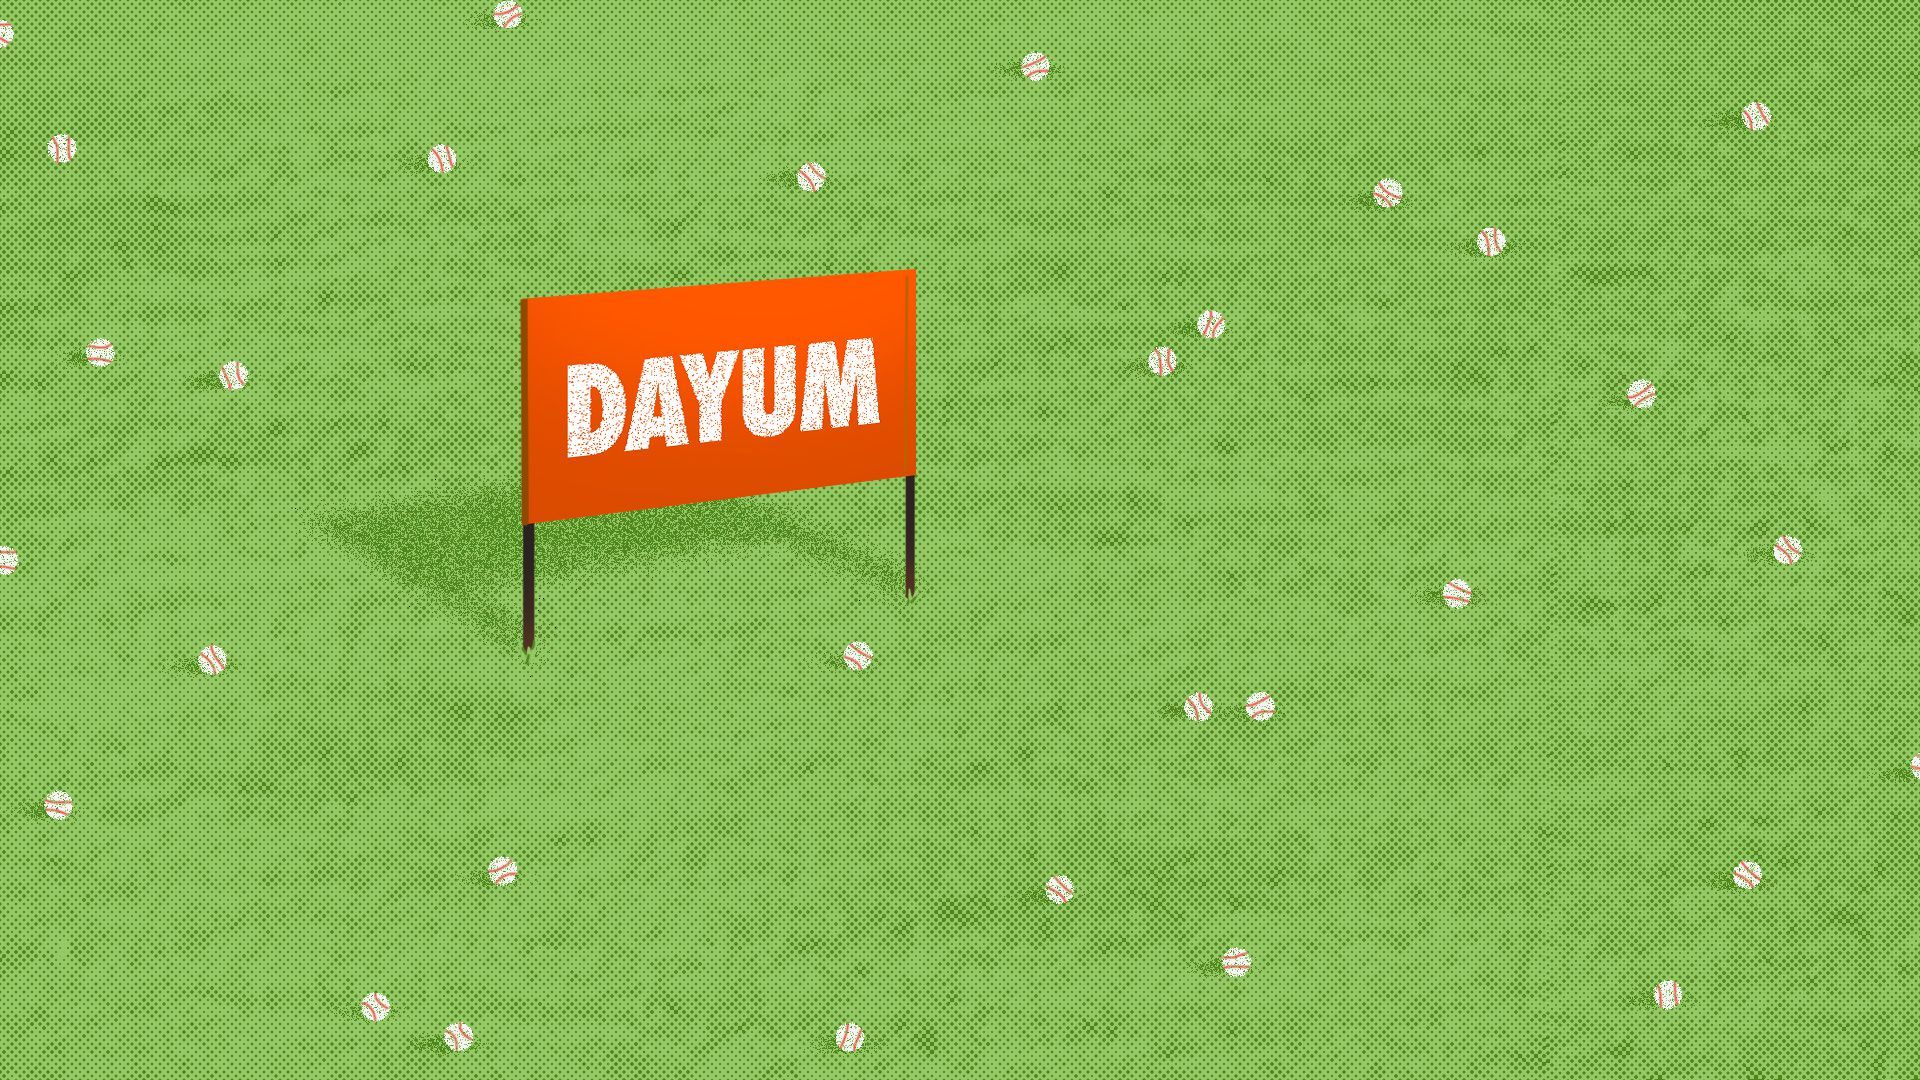 Illustration of a field of baseballs with sign reading 'Dayum'